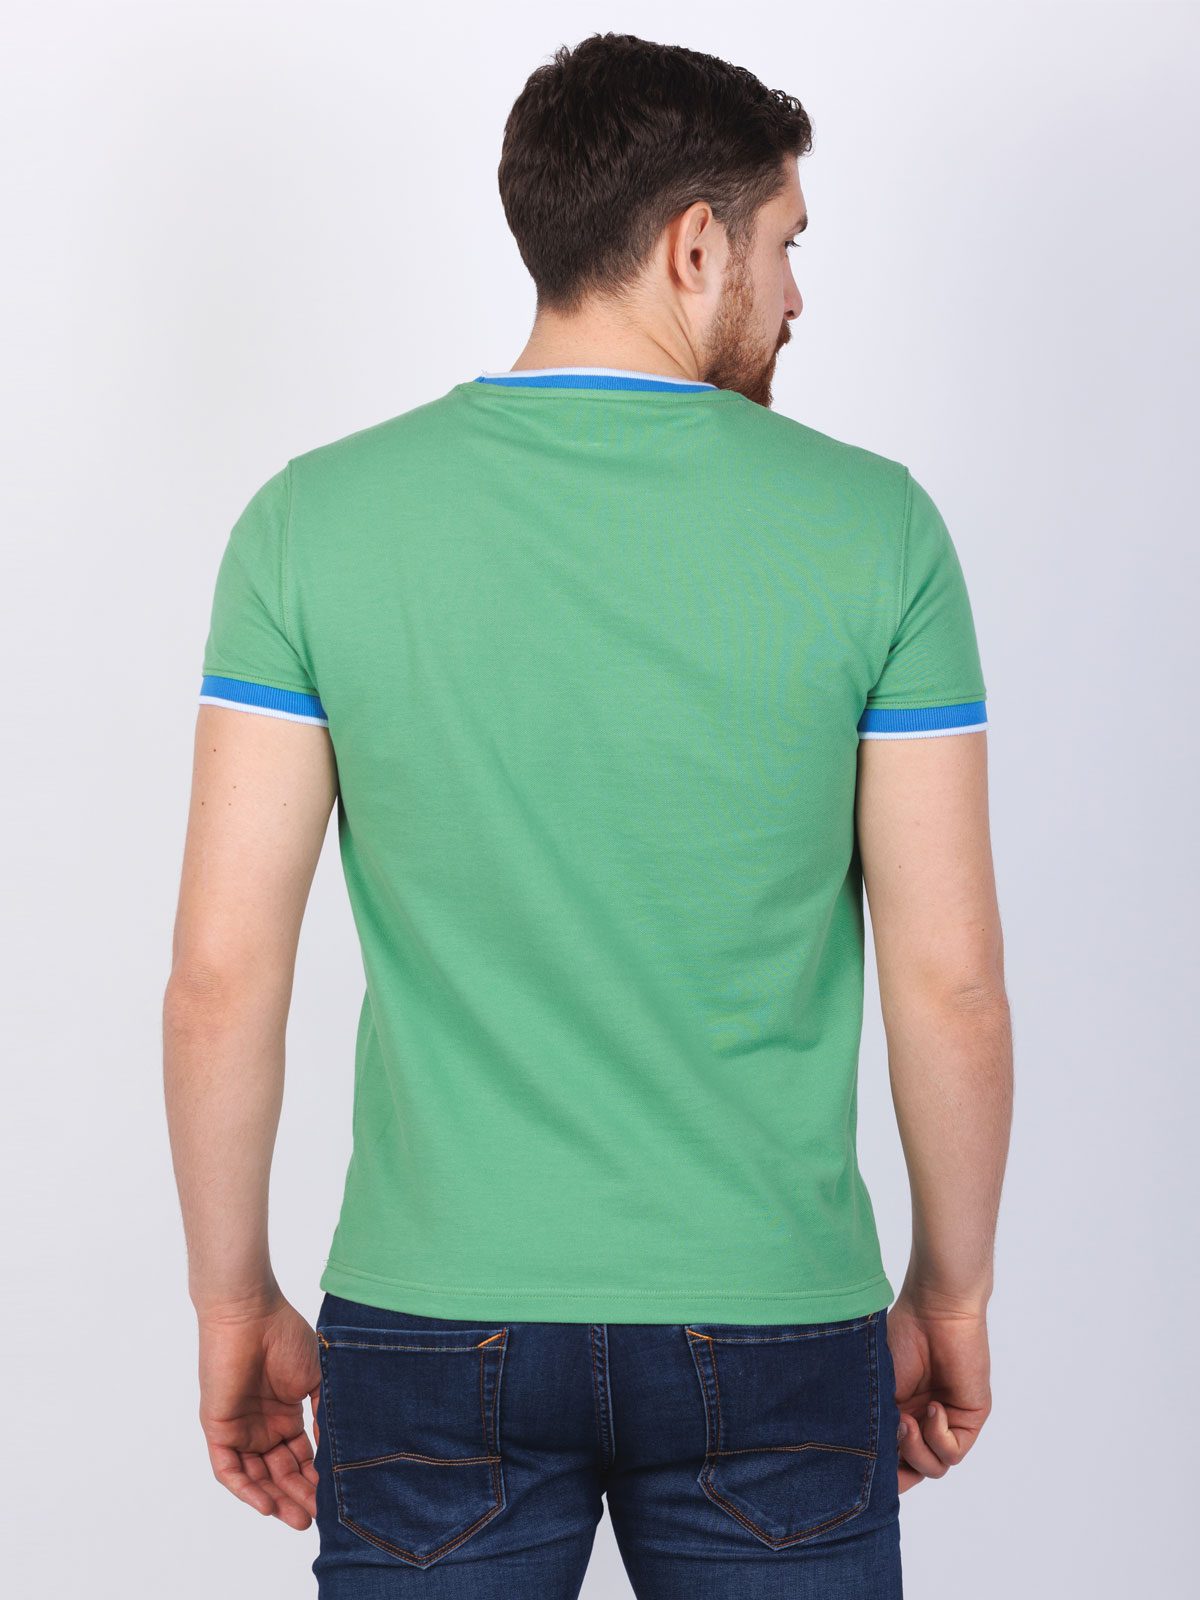 Tshirt in green with str print - 95364 € 19.12 img2